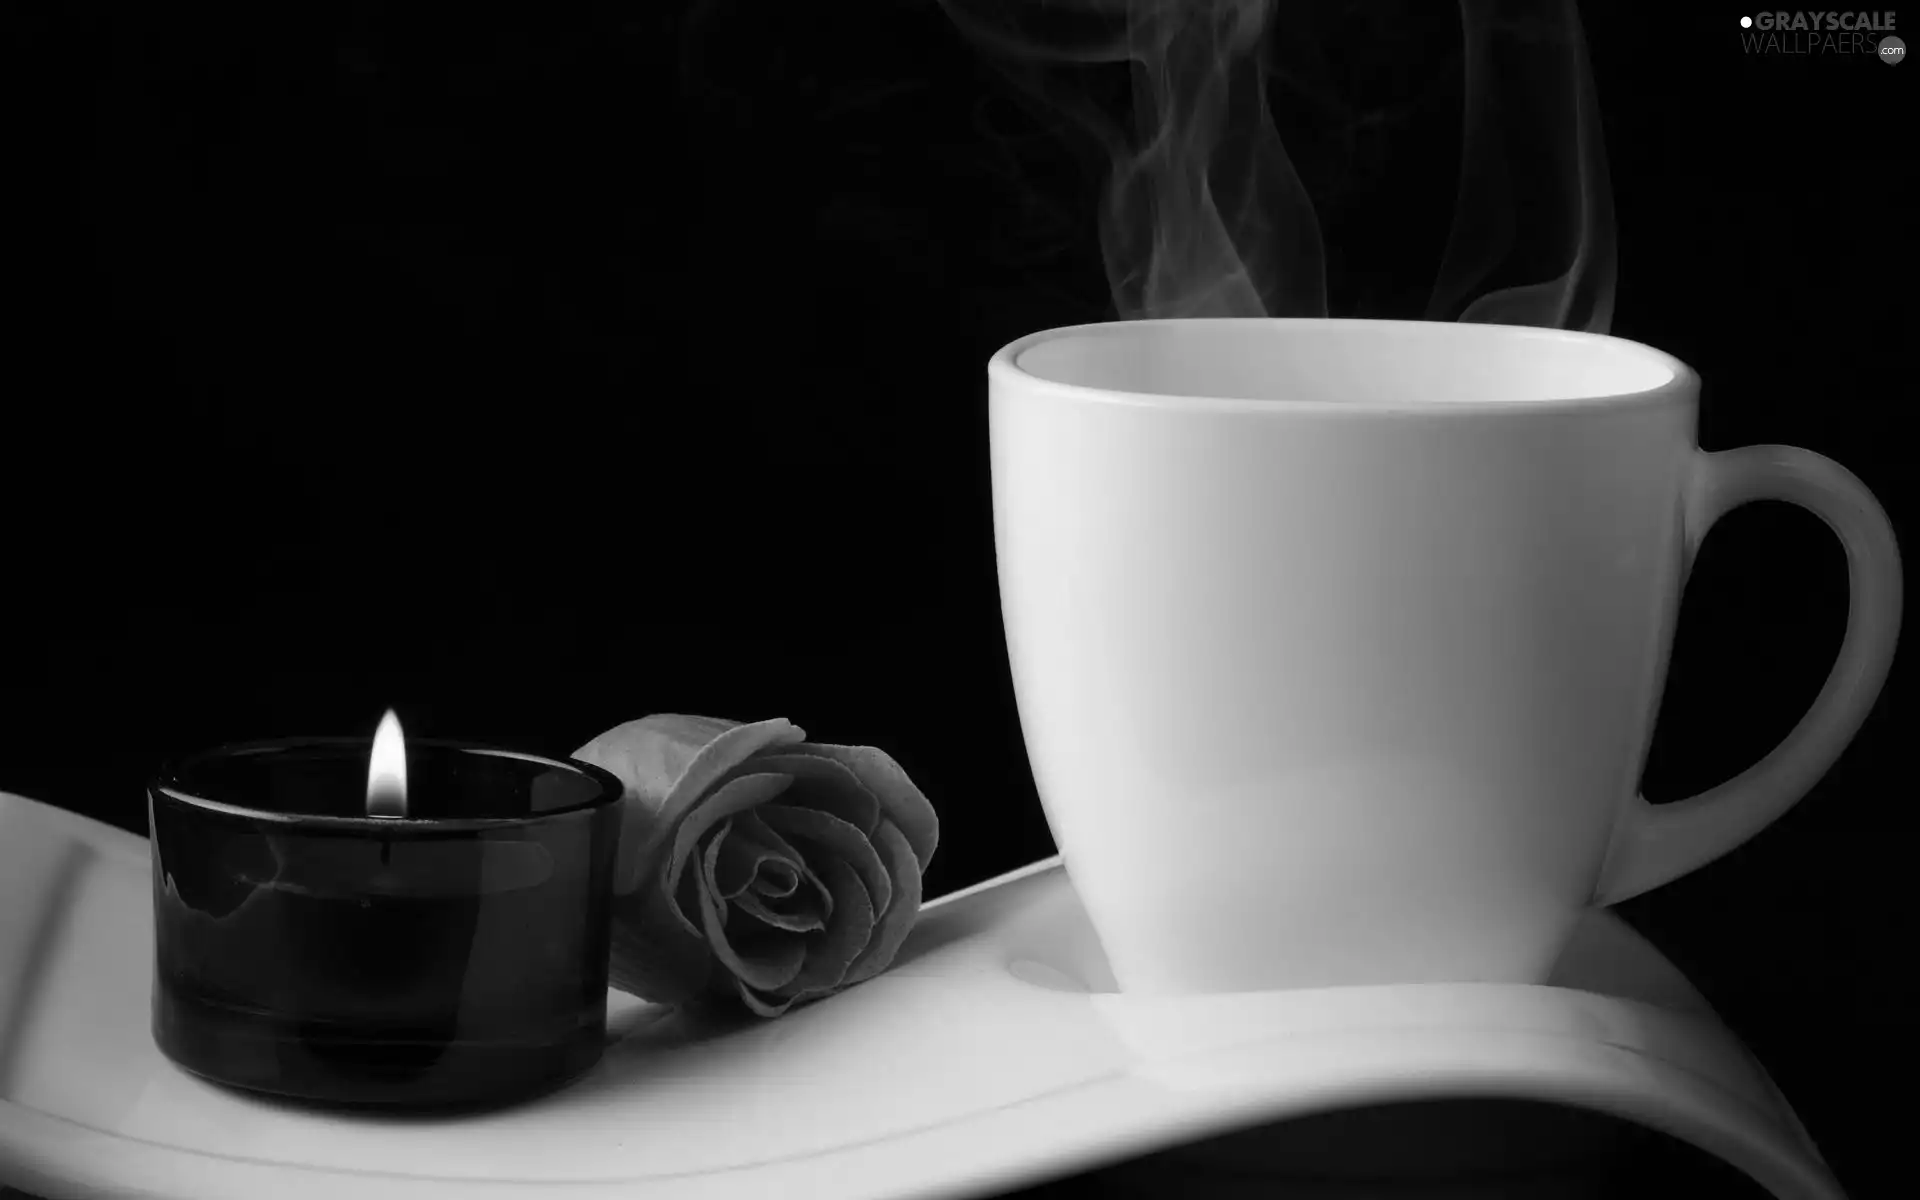 rose, coffee, candle